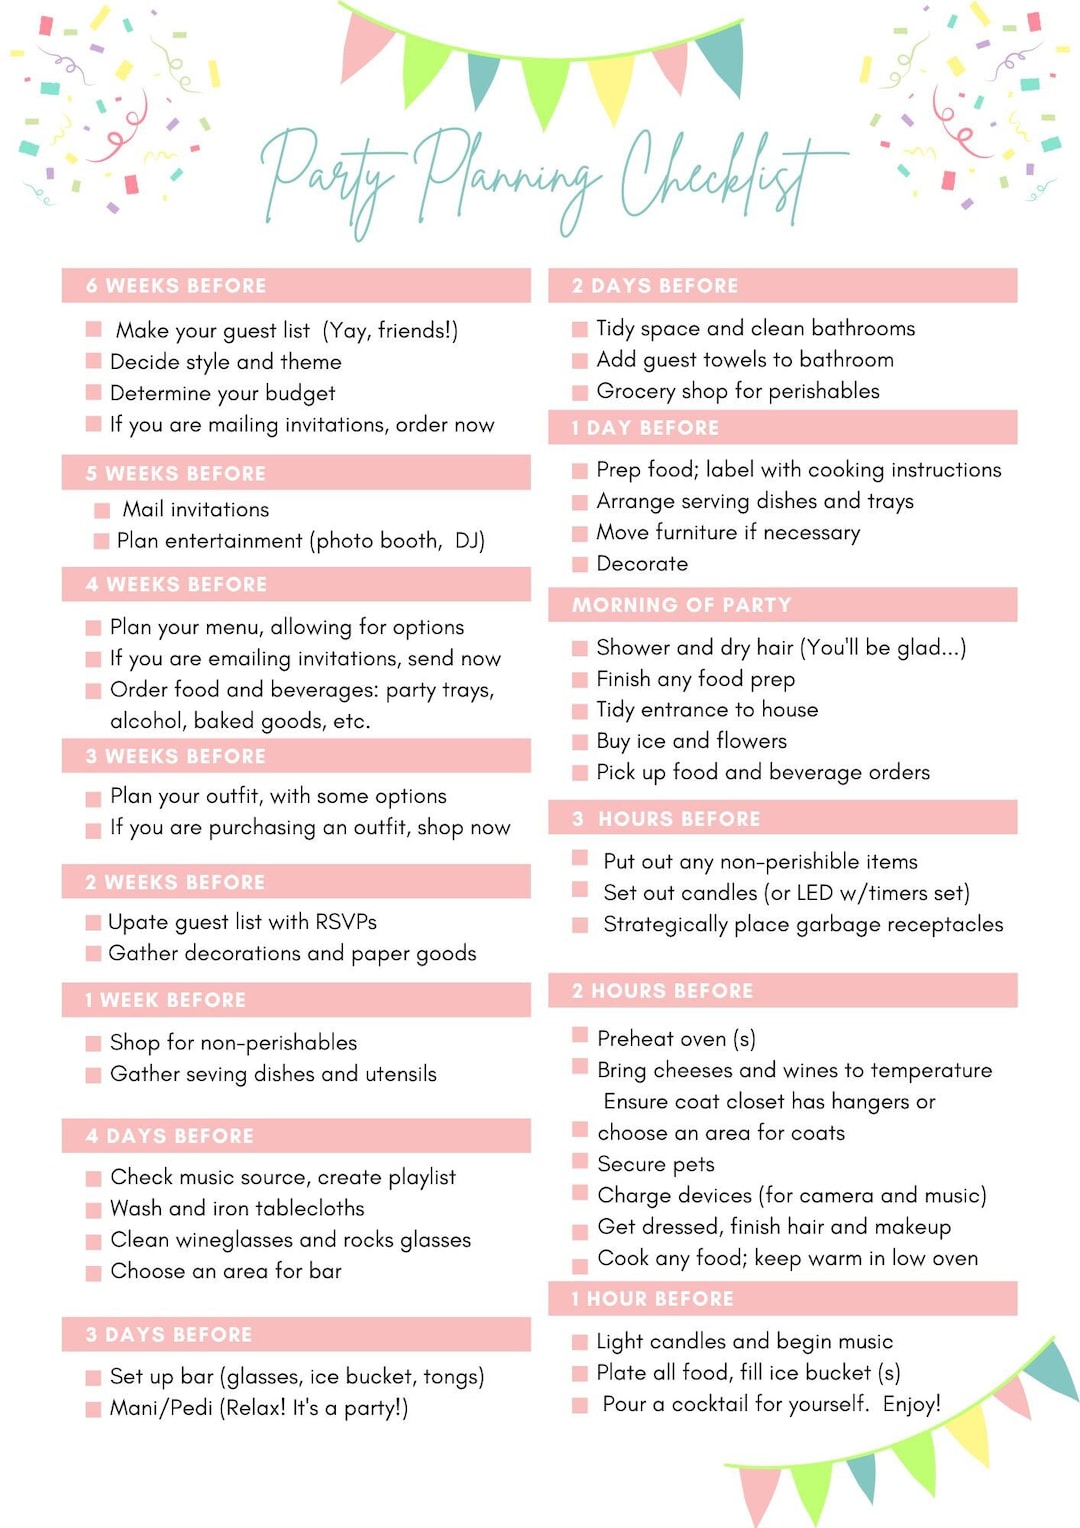 Party Planning Checklist and Tips (Instant Download) - Etsy